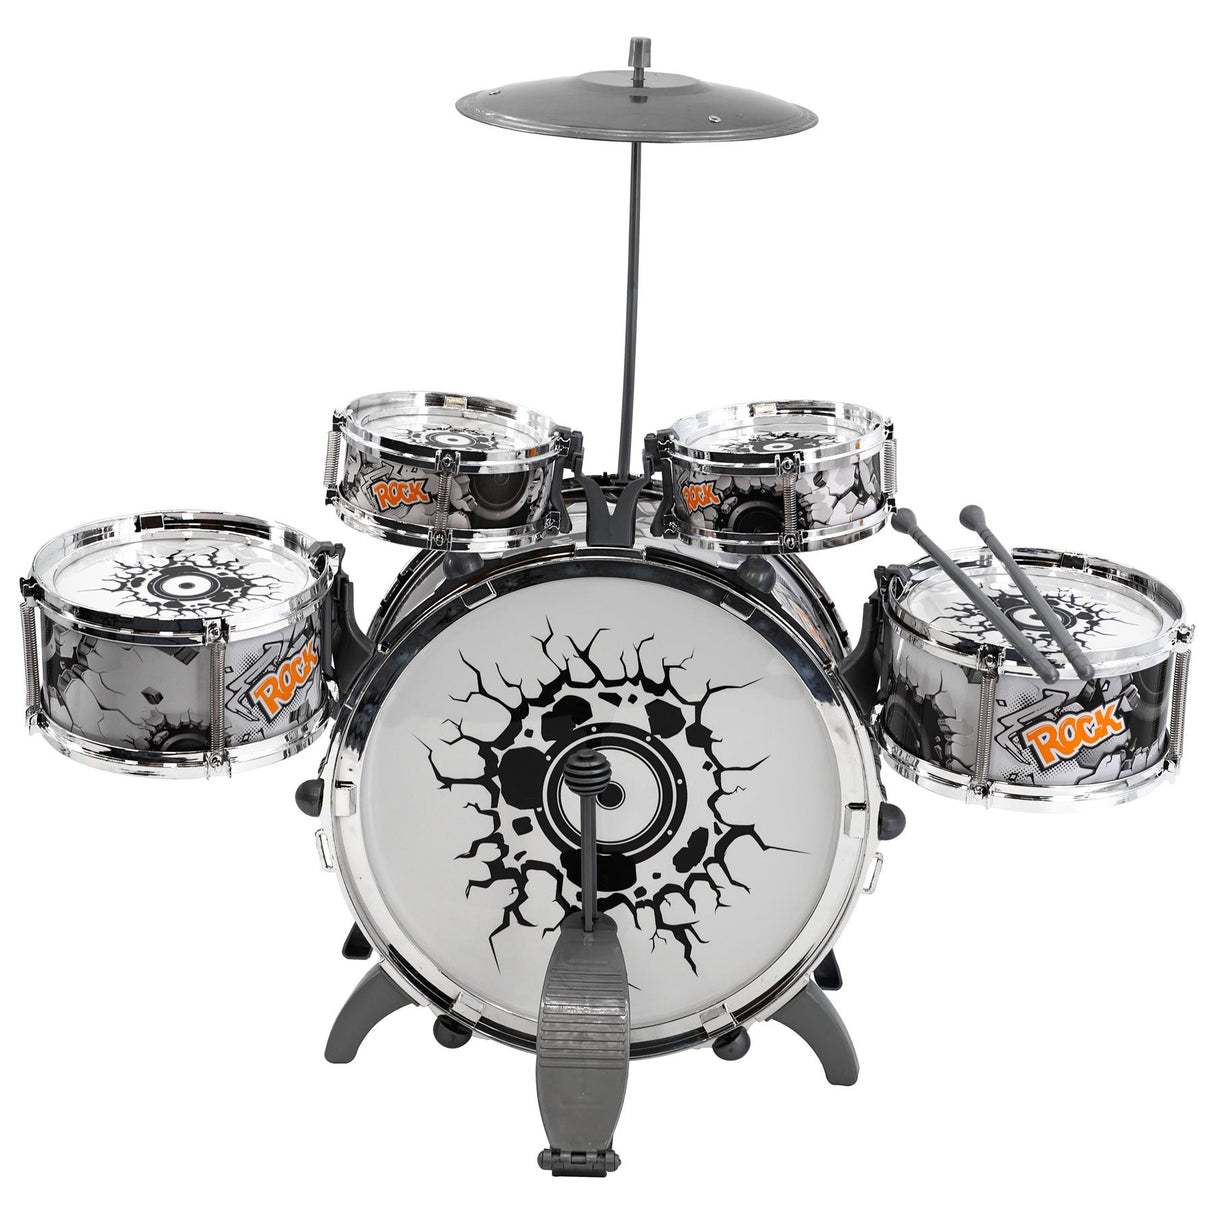 Kids Black and White Drum Kit Play Set by The Magic Toy Shop - UKBuyZone